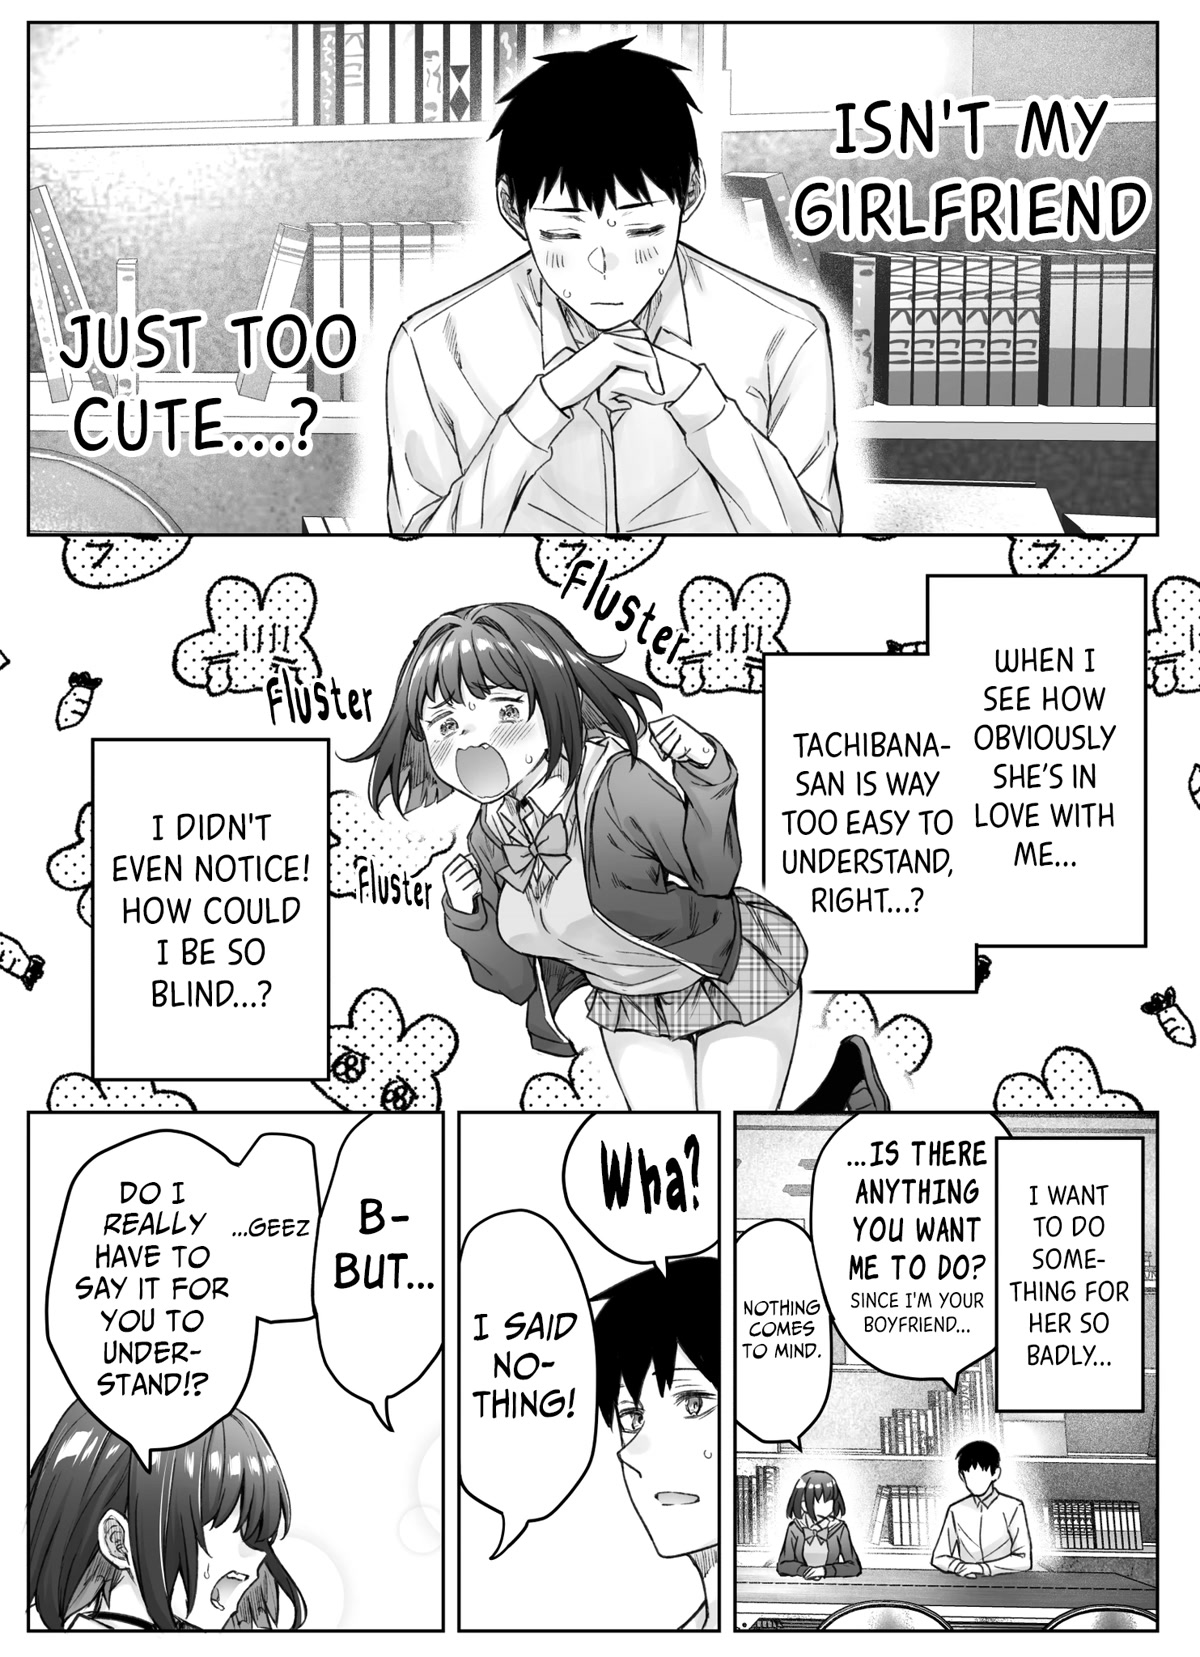 The Tsuntsuntsuntsuntsuntsun Tsuntsuntsuntsuntsundere Girl Getting Less And Less Tsun Day By Day Chapter 57 #1